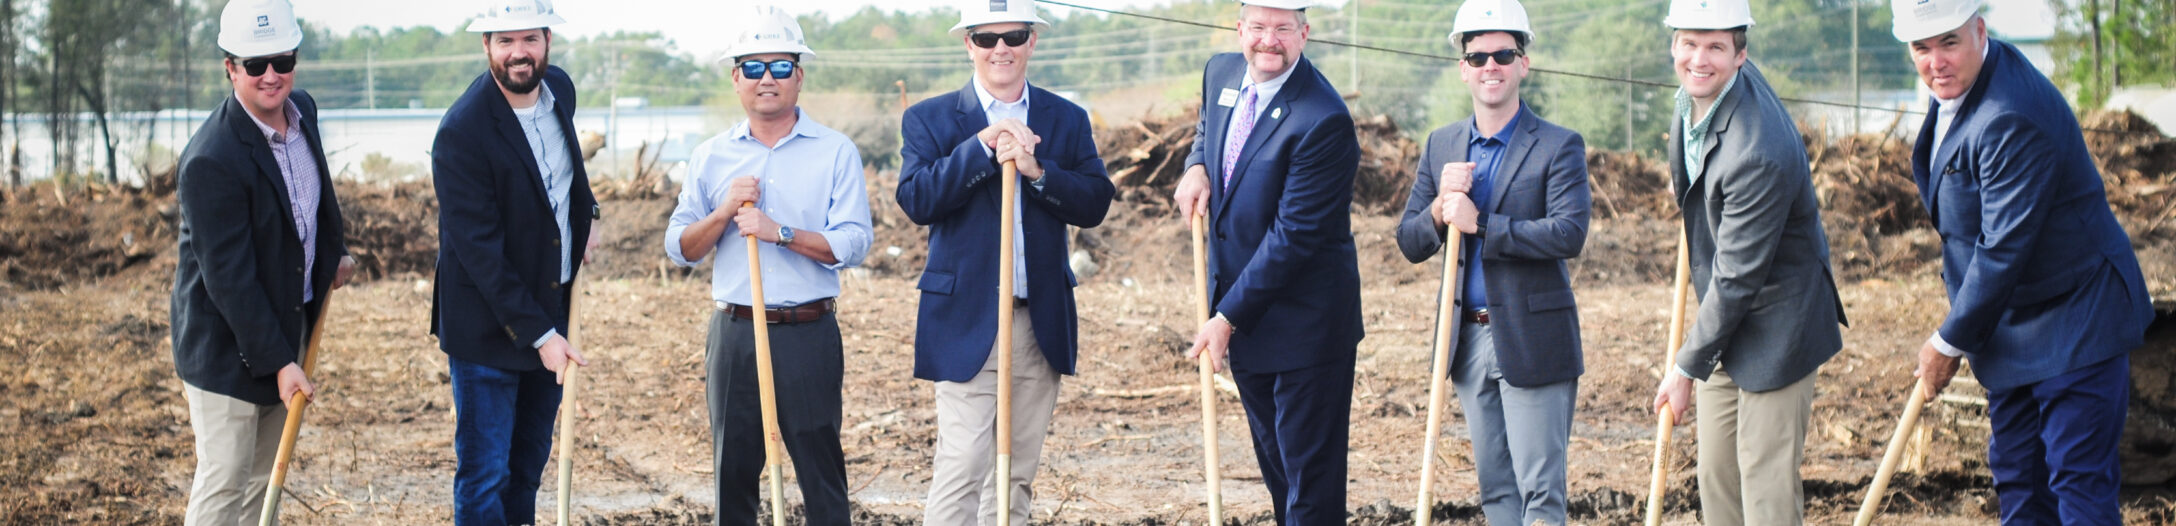 Dorchester County Economic Development Commences Construction with a Groundbreaking Ceremony for New Commerce Center in Summerville